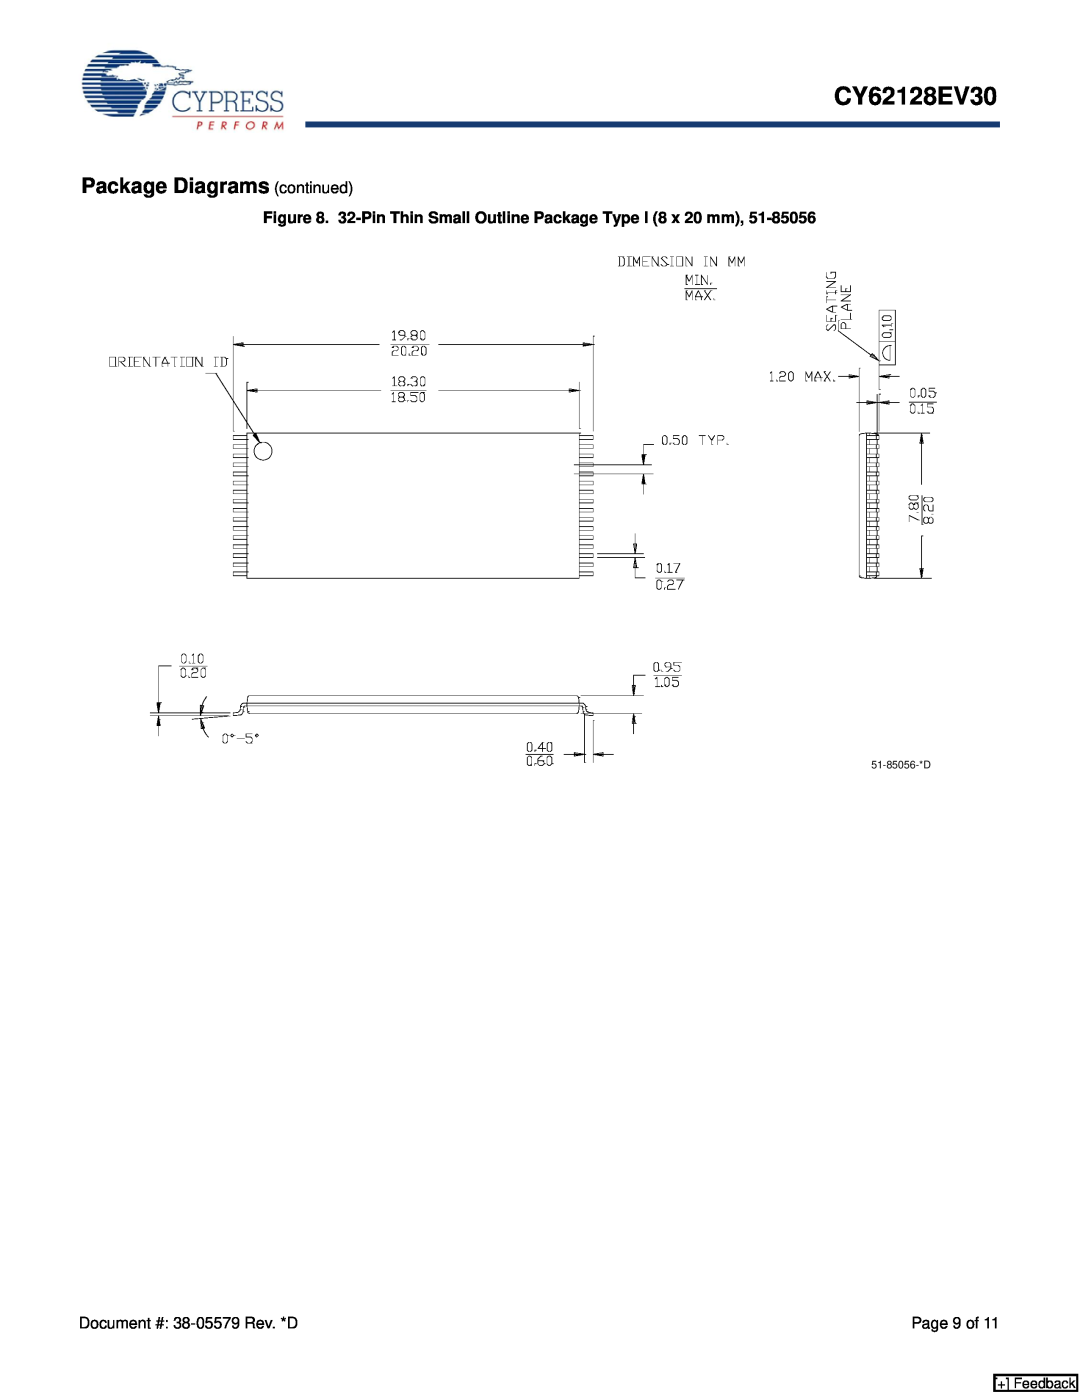 Cypress CY62128EV30 manual Package Diagrams continued, 32-Pin Thin Small Outline Package Type I 8 x 20 mm, + Feedback 